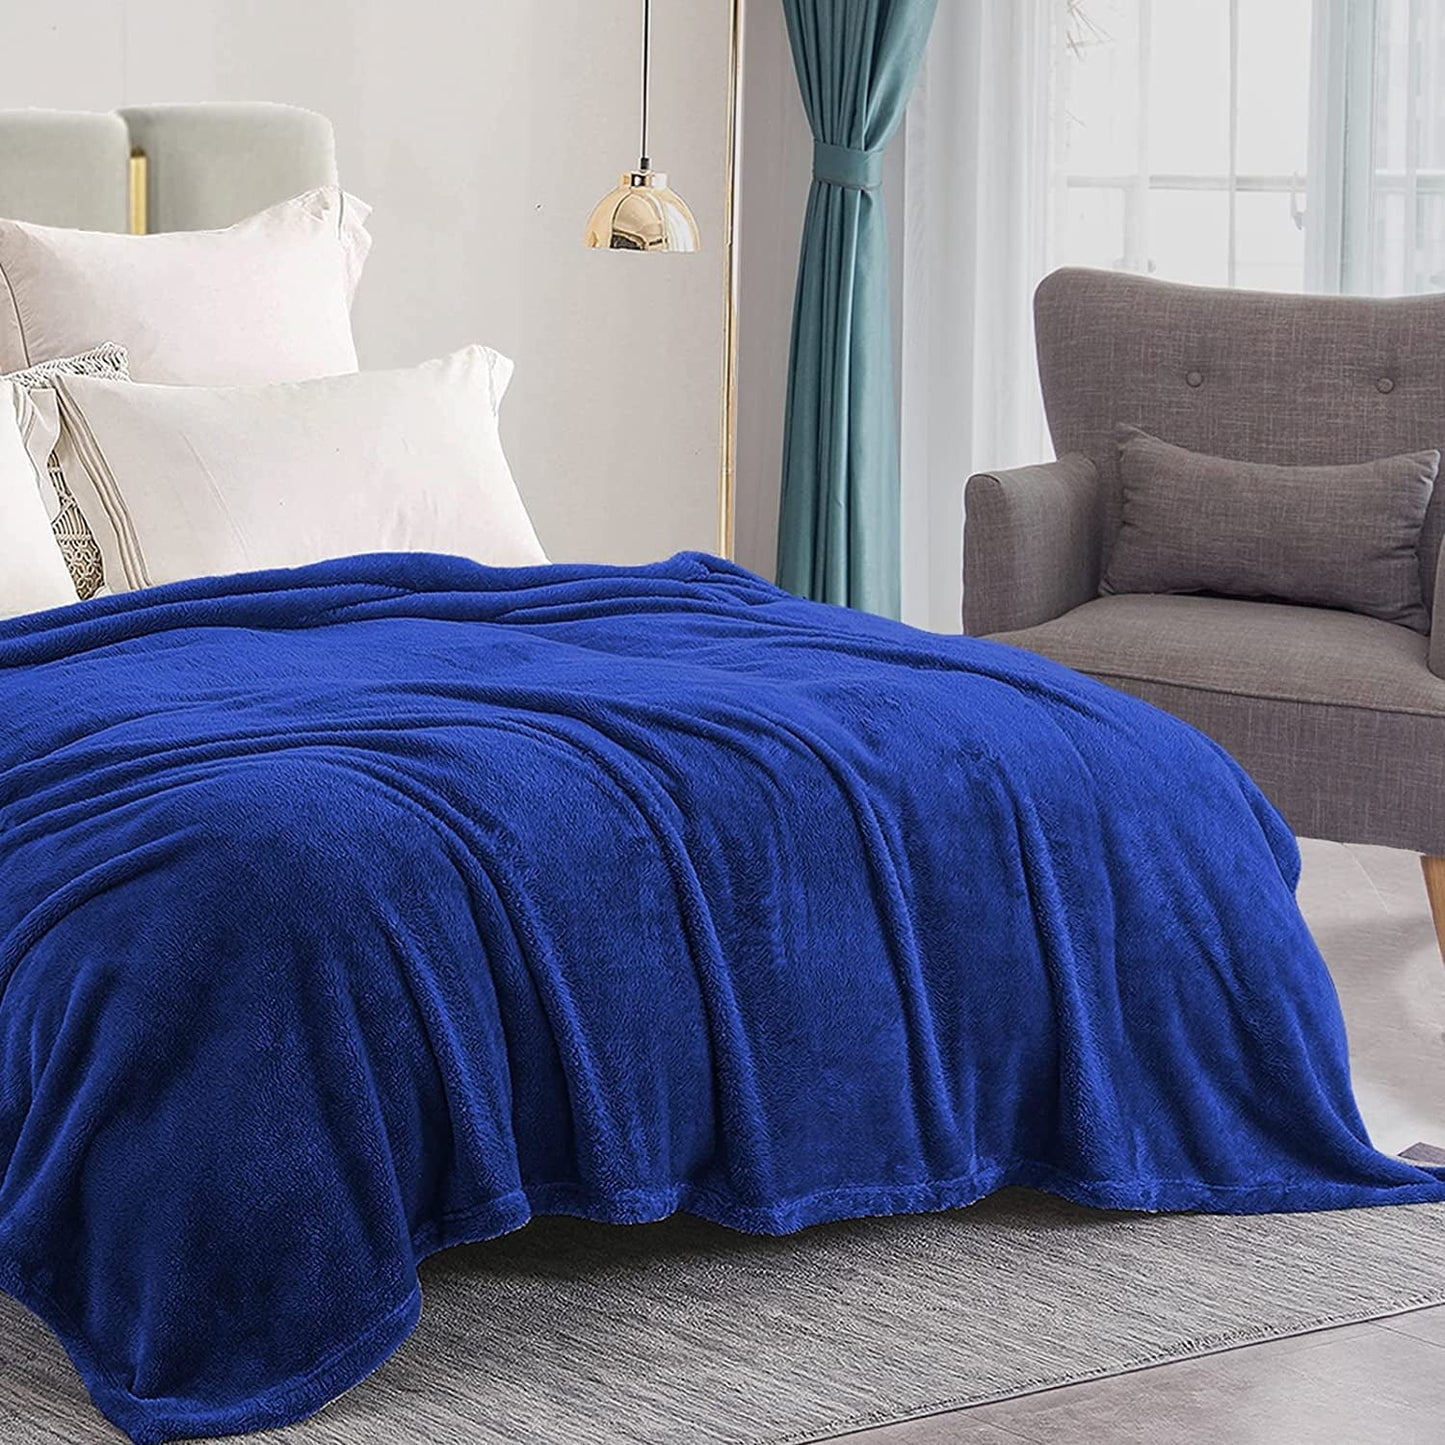 Exclusivo Mezcla Plush Fuzzy Fleece King Size Bed Blanket, Super Soft Fluffy and Thick Blankets for Travel Bed and Couch (Cobalt Blue, 90x104 inches)